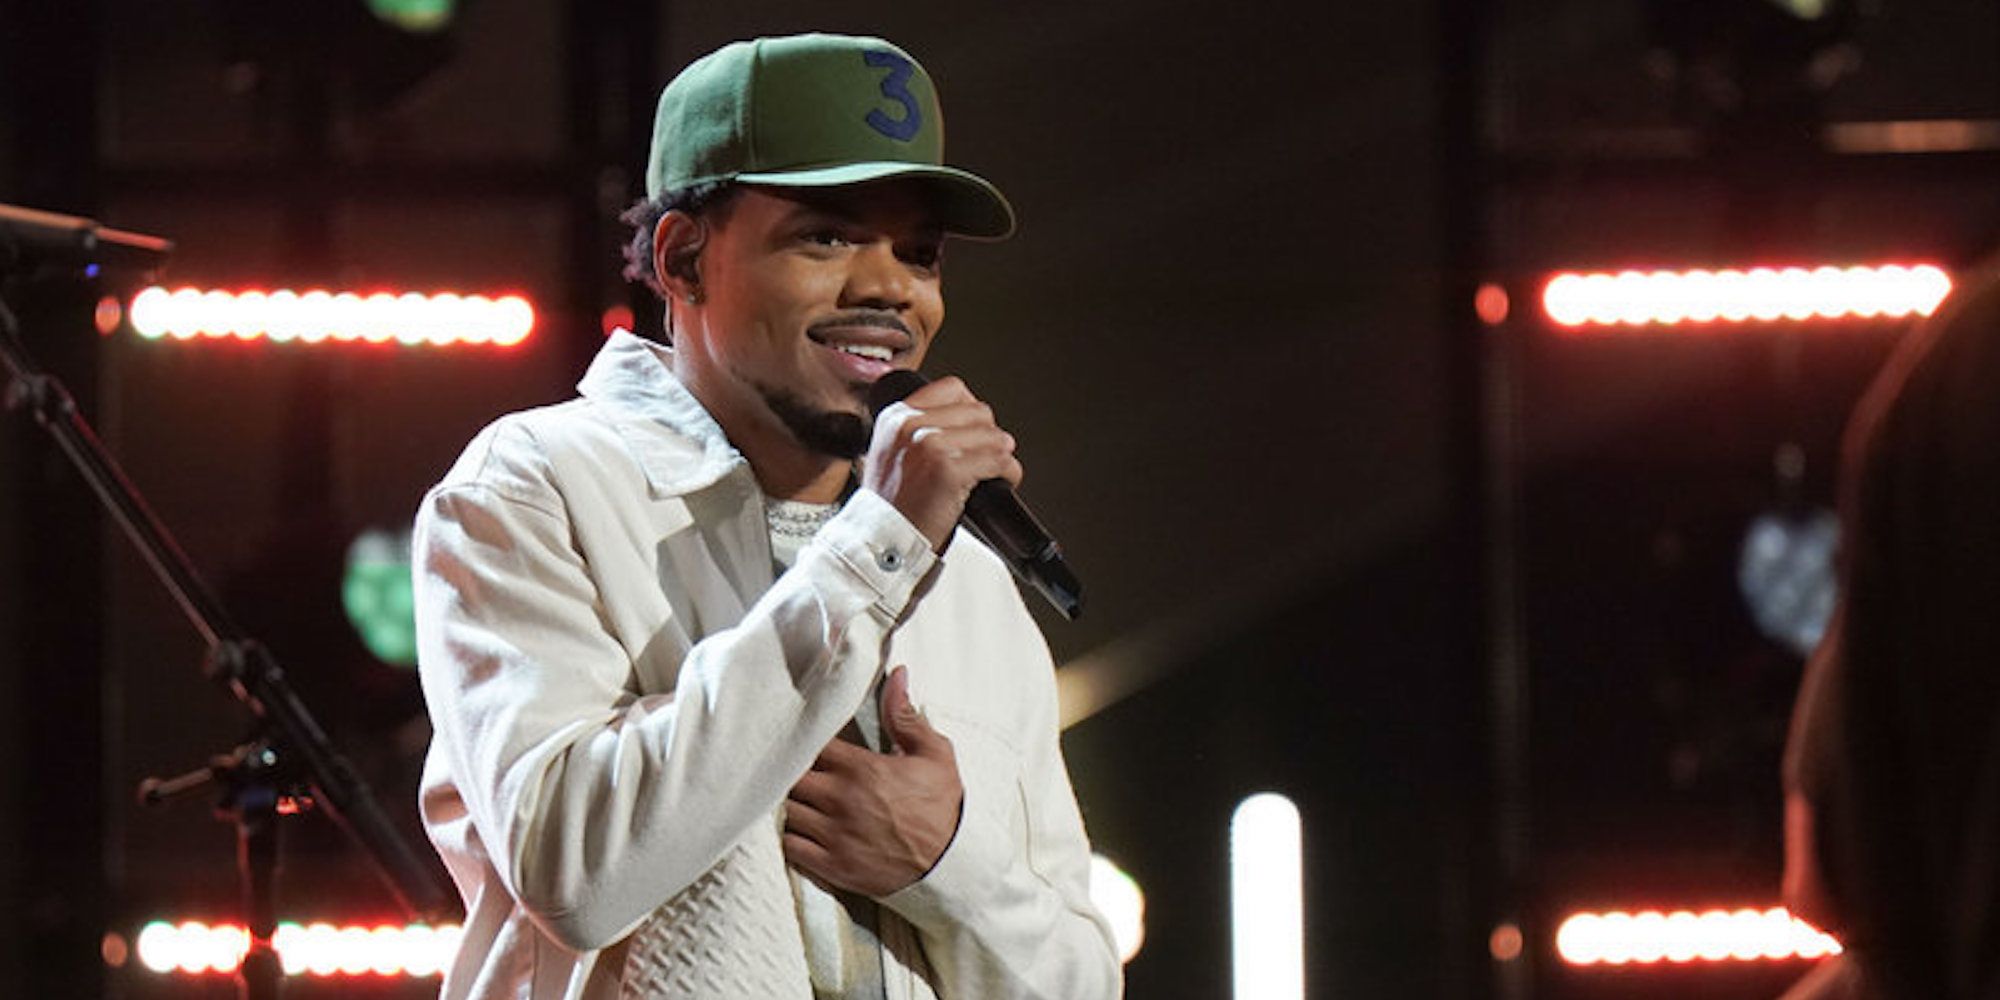 Chance the Rapper addresses the audience with a microphone in his hand on 'The Voice'